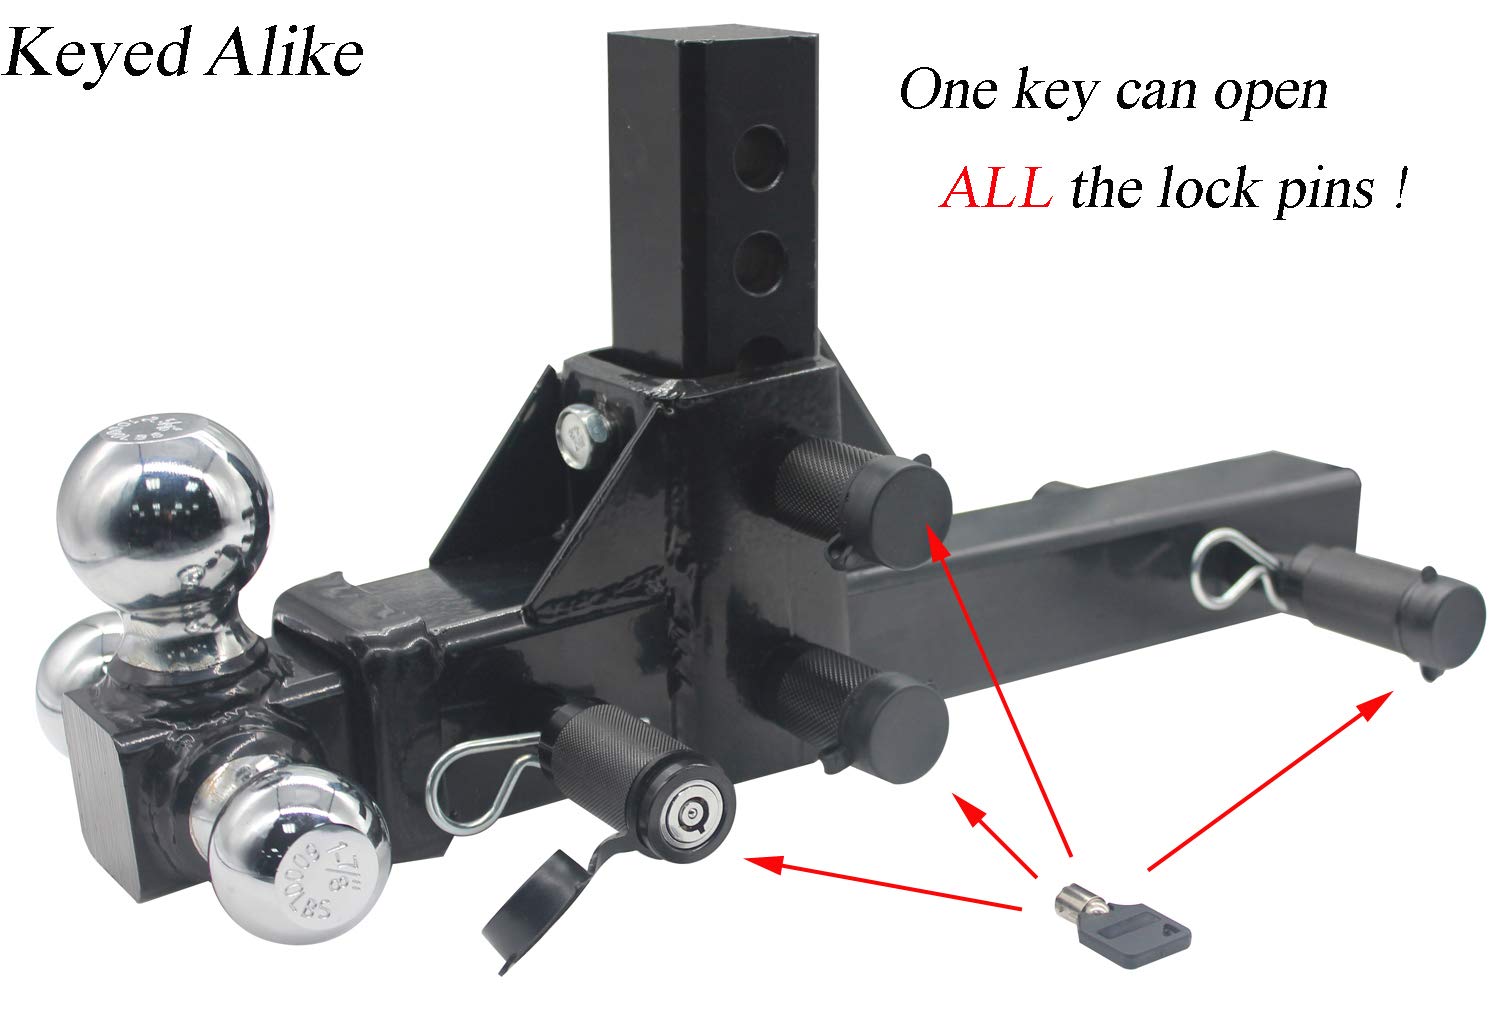 AC-DK Adjustable Trailer Hitch Ball Mount, Fits 2-Inch Receiver, 5-3/4-Inch Drop, 1-7/8, 2, 2-5/16-Inch Balls, 10,000 lbs, Come with 4-Pack 5/8" Tow Hitch Pin Locks Keys